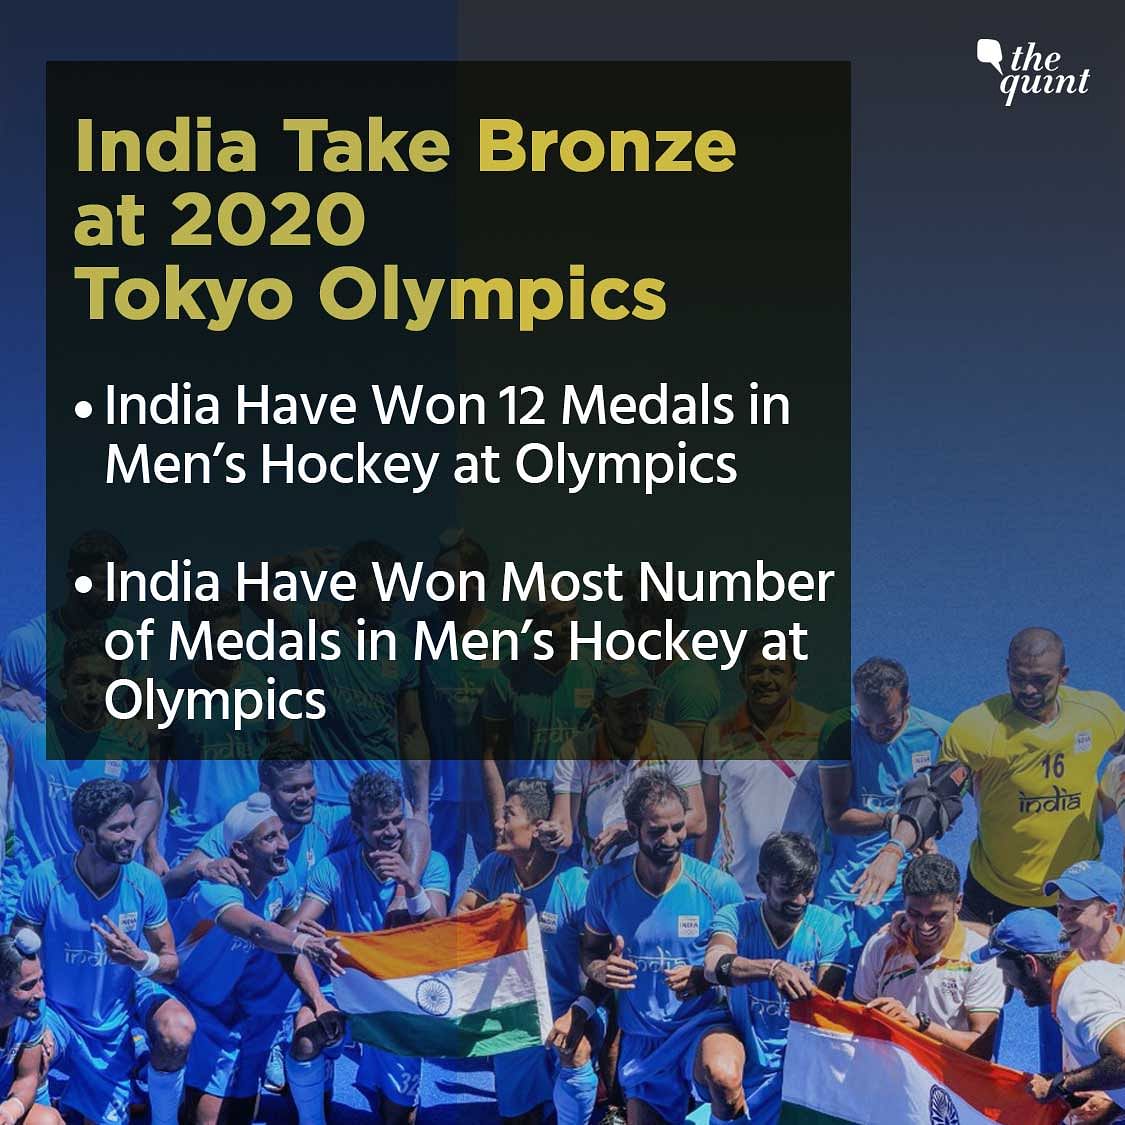 The Indian men's hockey team won their first medal since 1980 at the Olympic Games in Tokyo. 